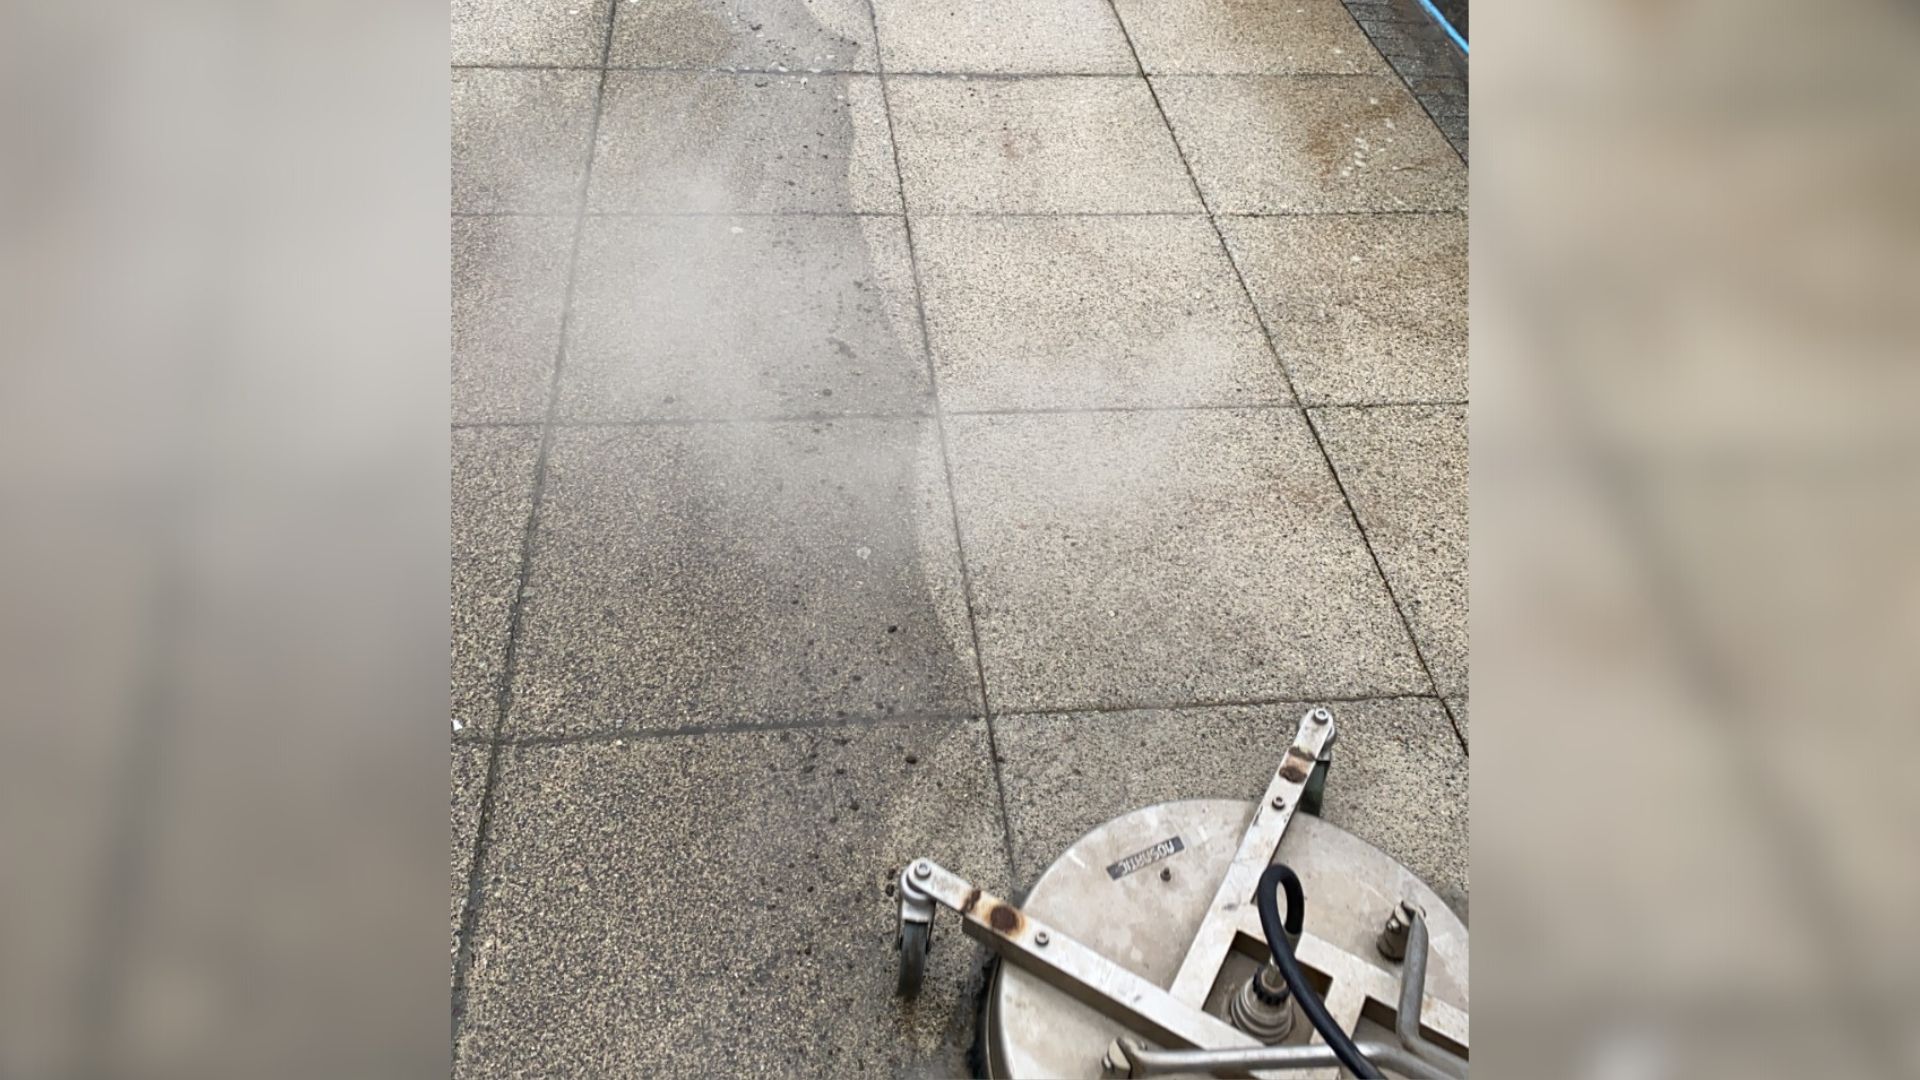 pavement cleaning to help illustrate Vinci's stone cleaning services.